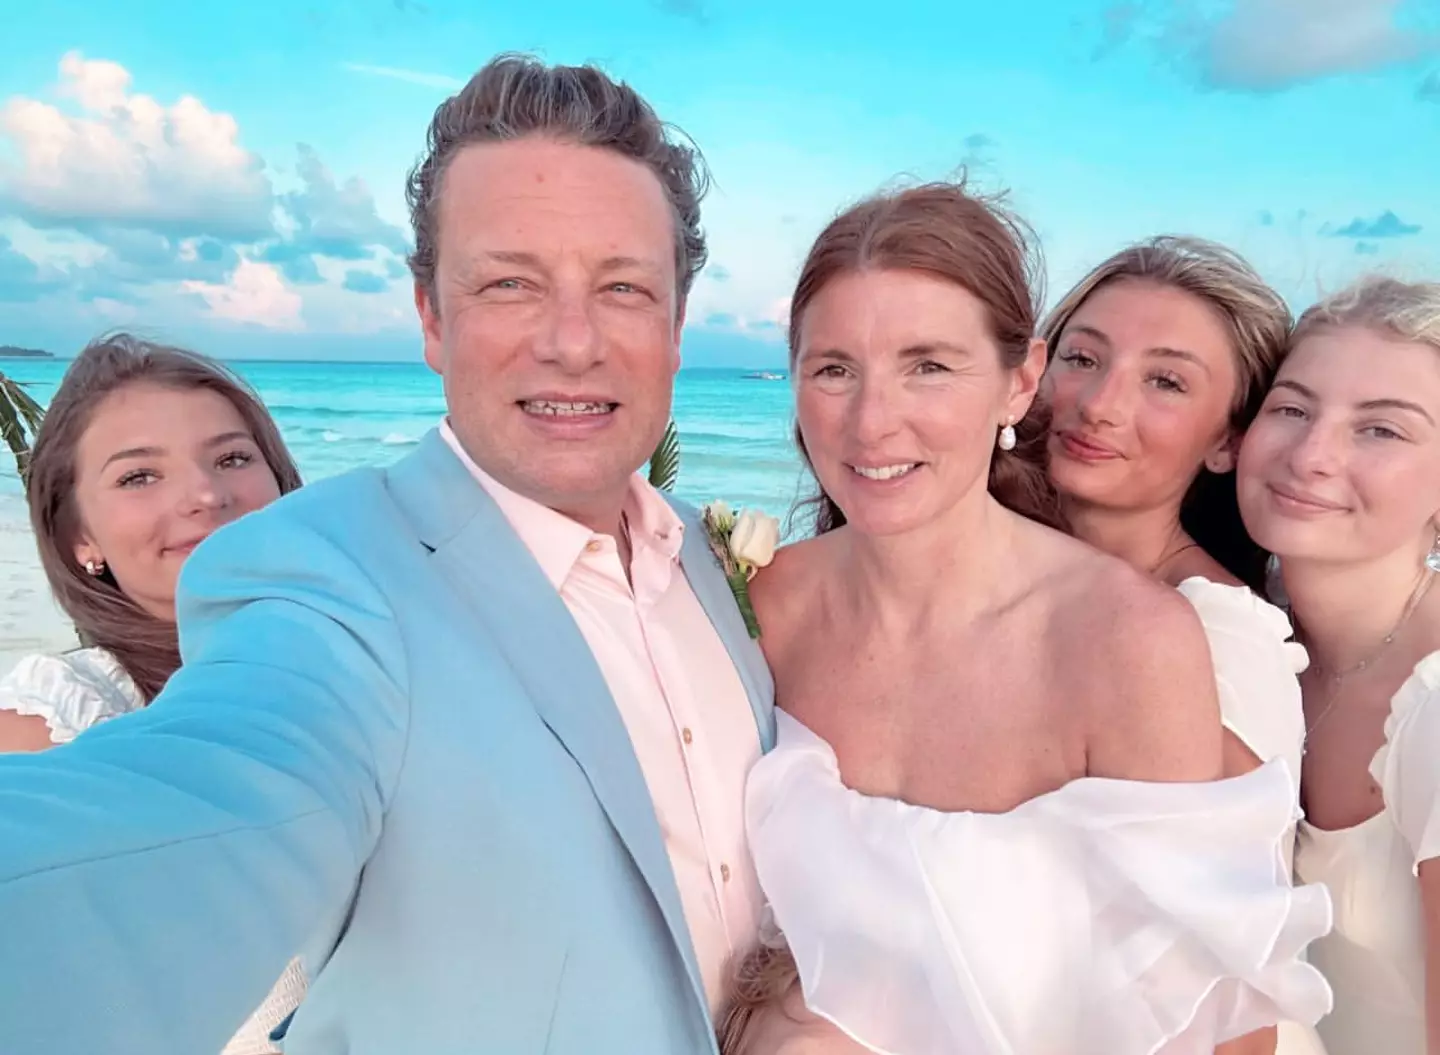 Jamie and Jools got married again in the Maldives.